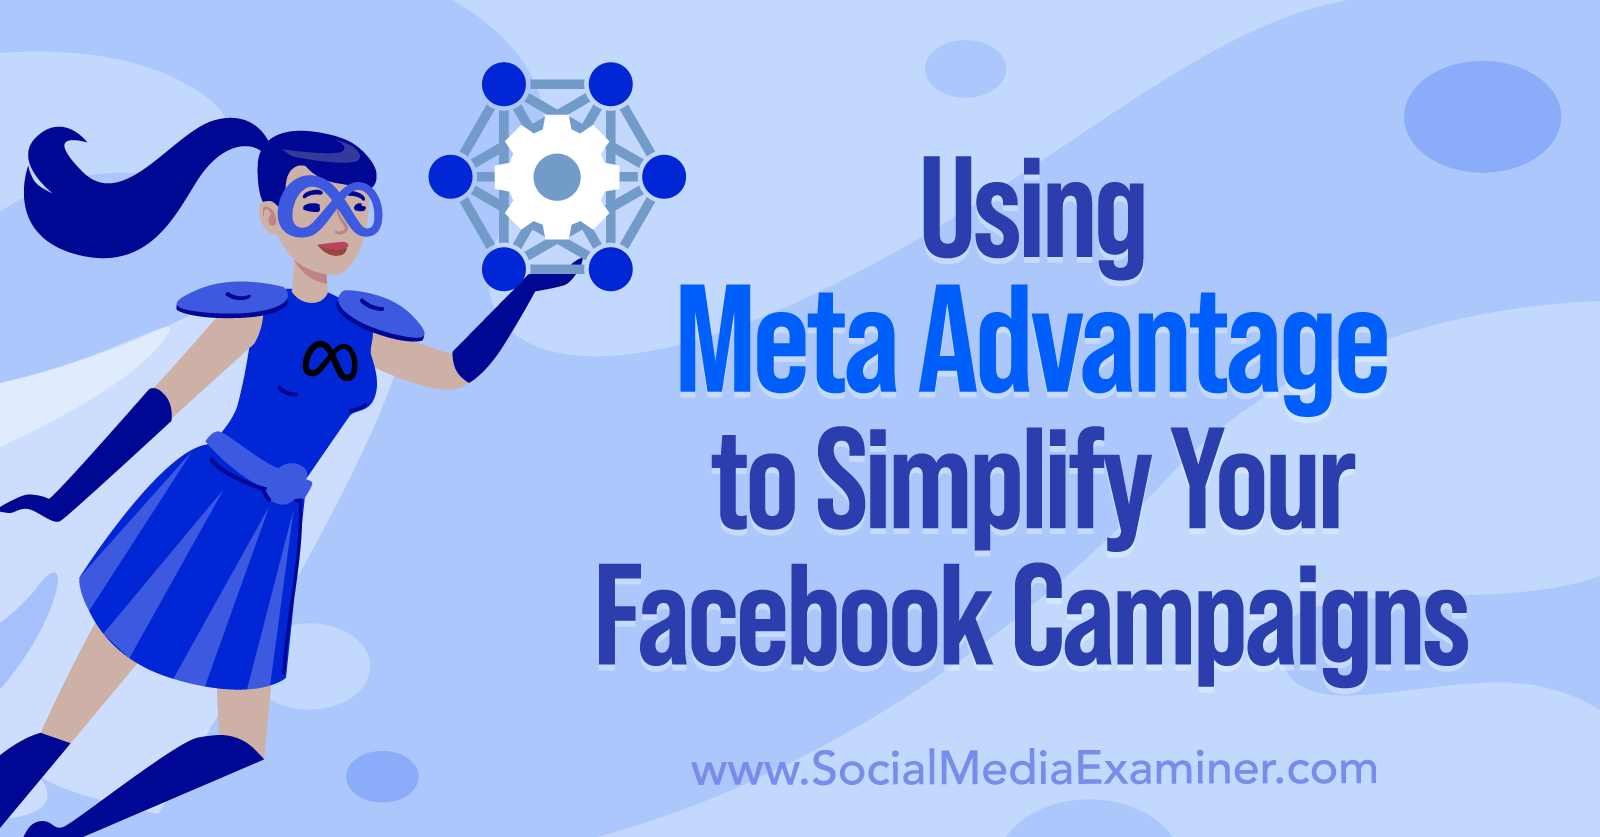 Using Meta Advantage to Simplify Your Facebook Campaigns by Anna Sonnenberg on Social Media Examiner.